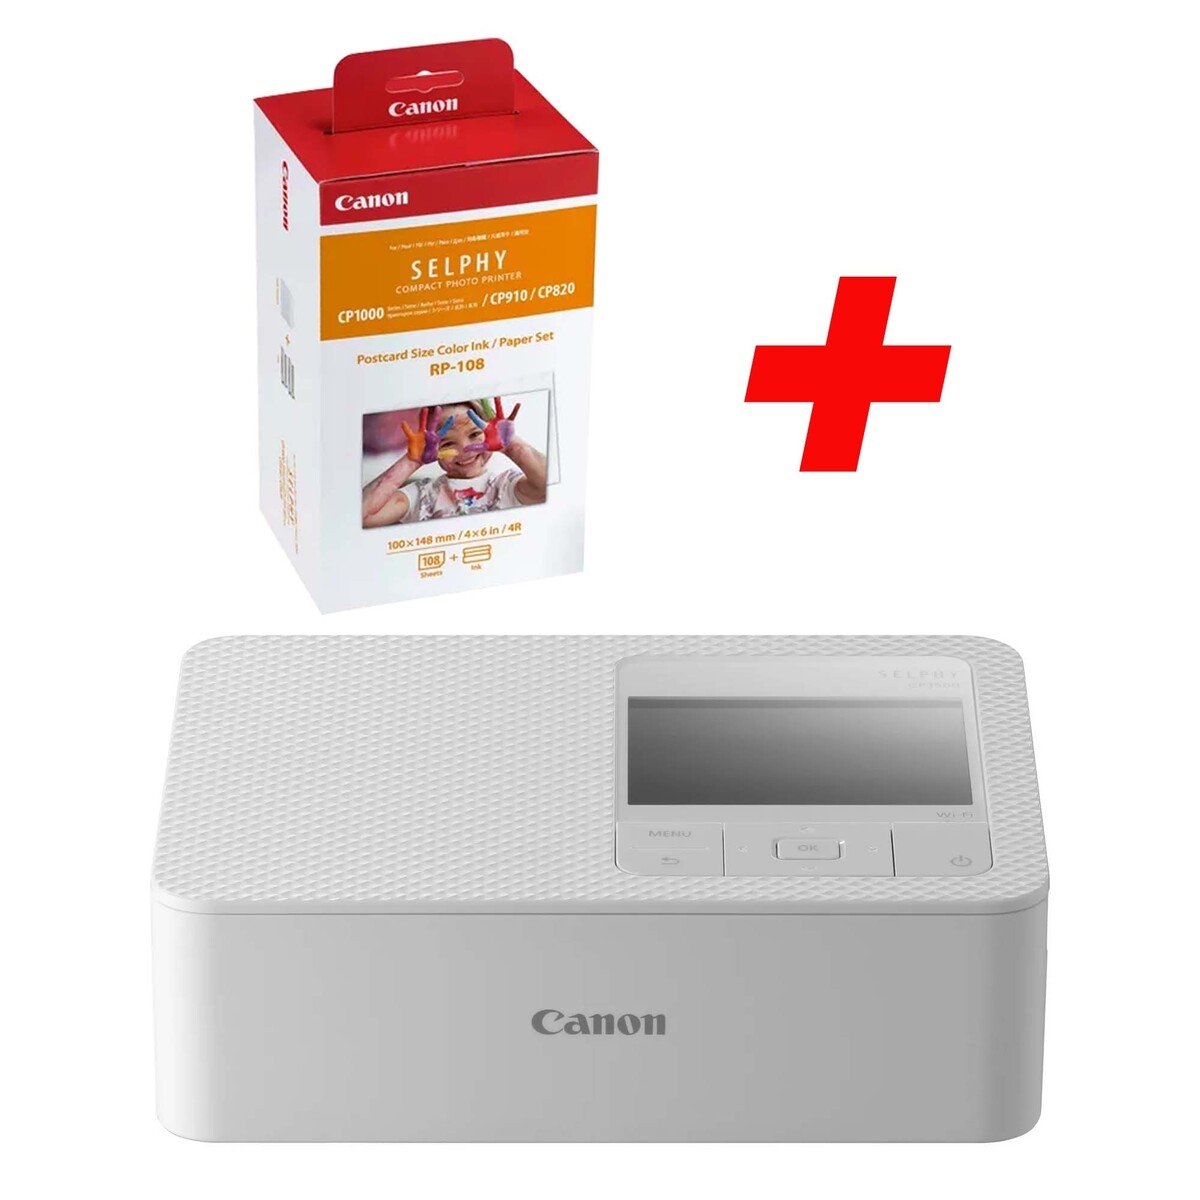 Canon SELPHY CP1500 Colour Portable Photo Printer - White + Canon RP-108  Colour Ink + 100 x 148 mm Paper Set, 108 Sheets Online at Best Price, Photo Printer